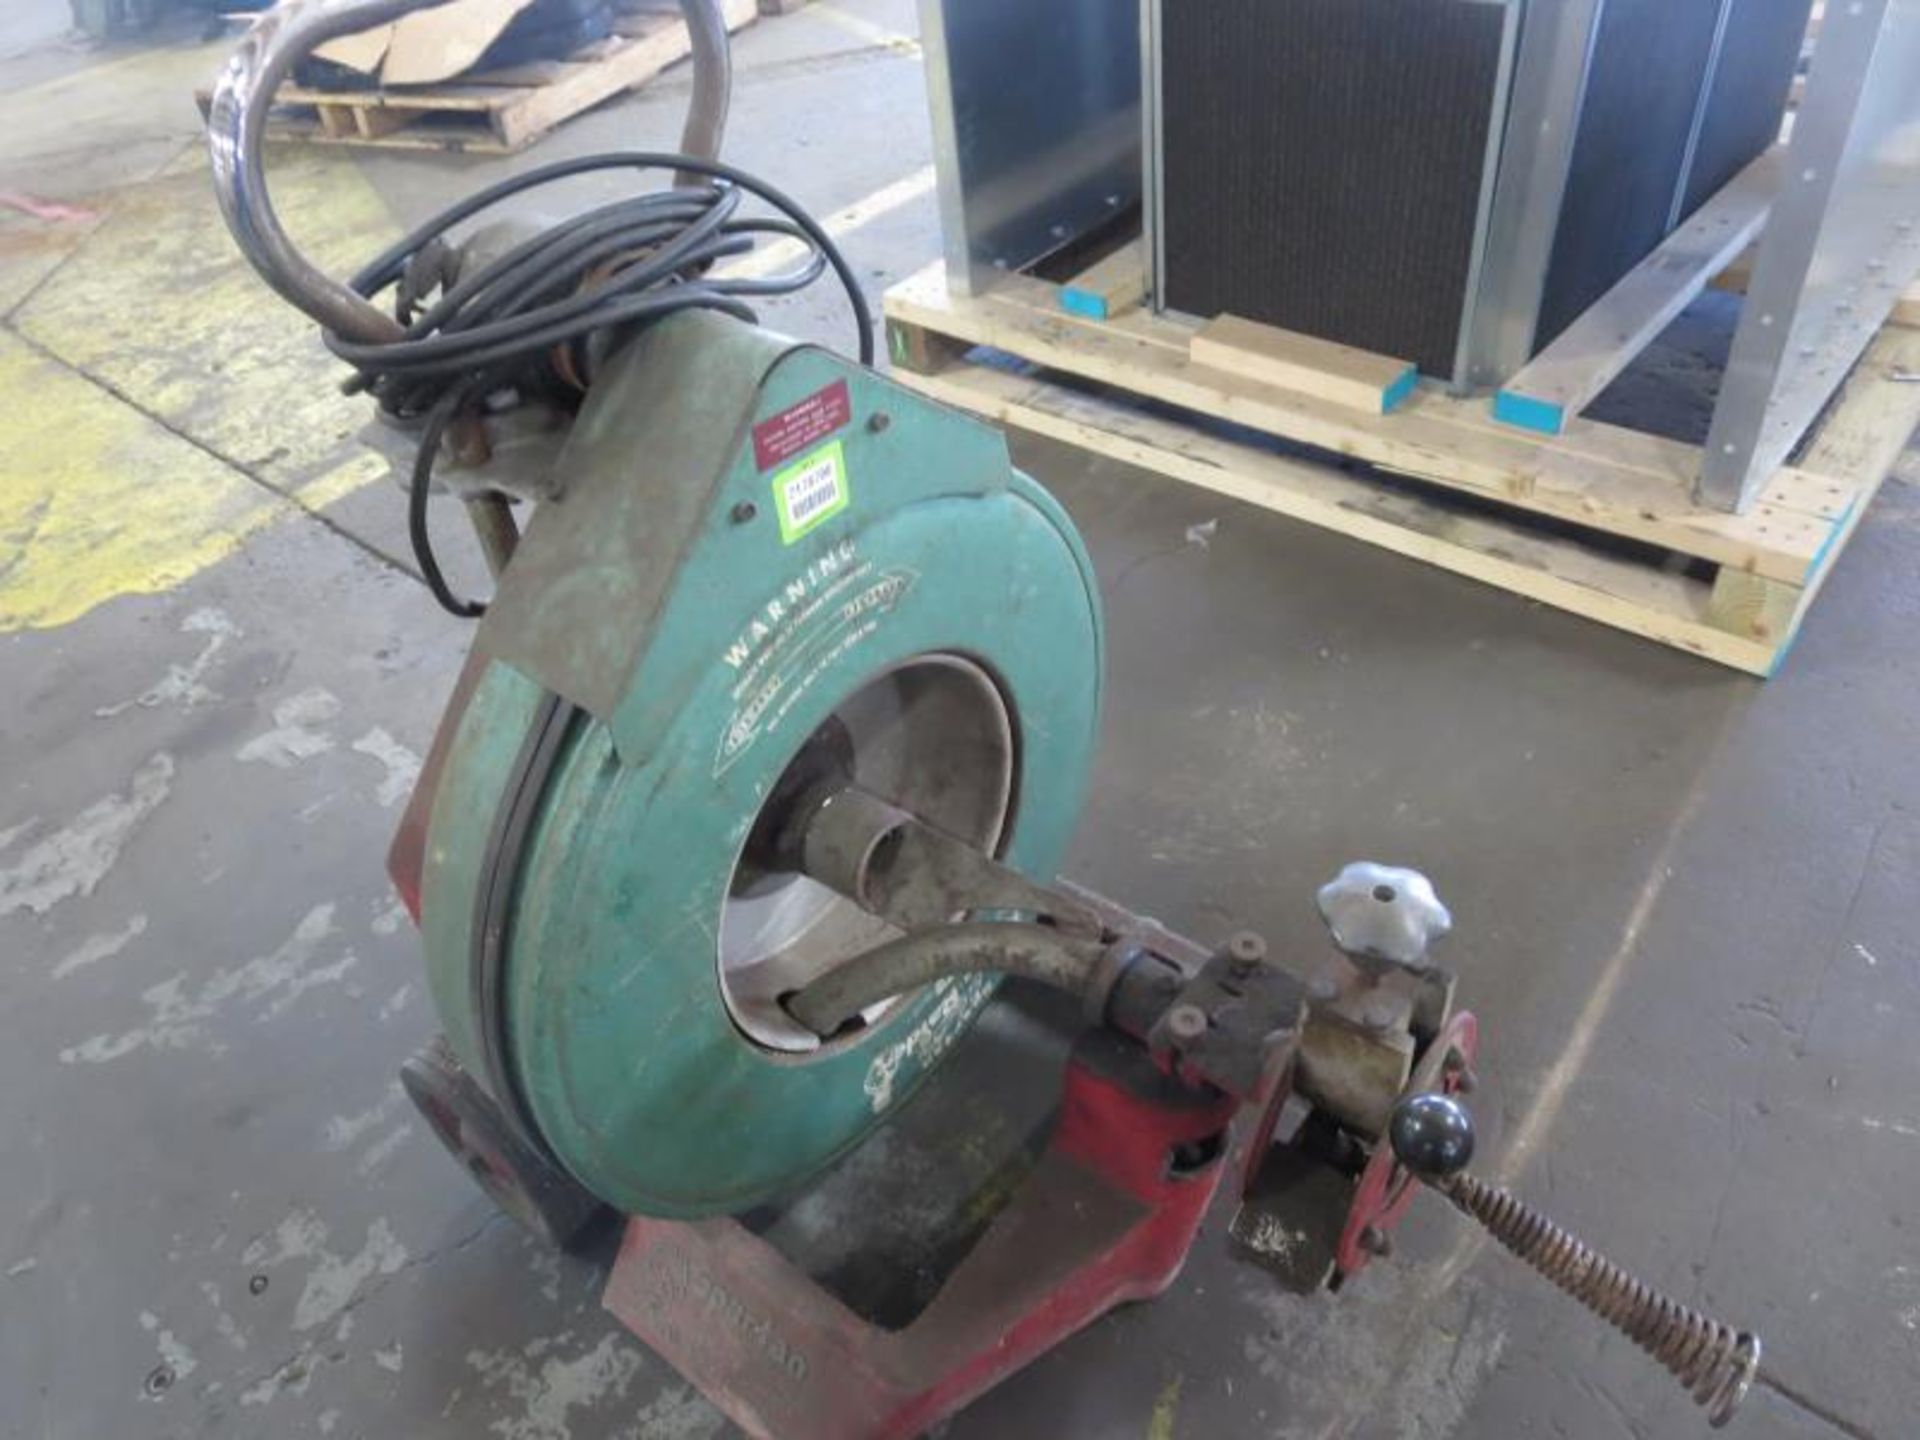 Spartan Raider 1065 Electric Drain Cleaning Machine. Hit # 2178700. M5-M6. Asset Located at 1425